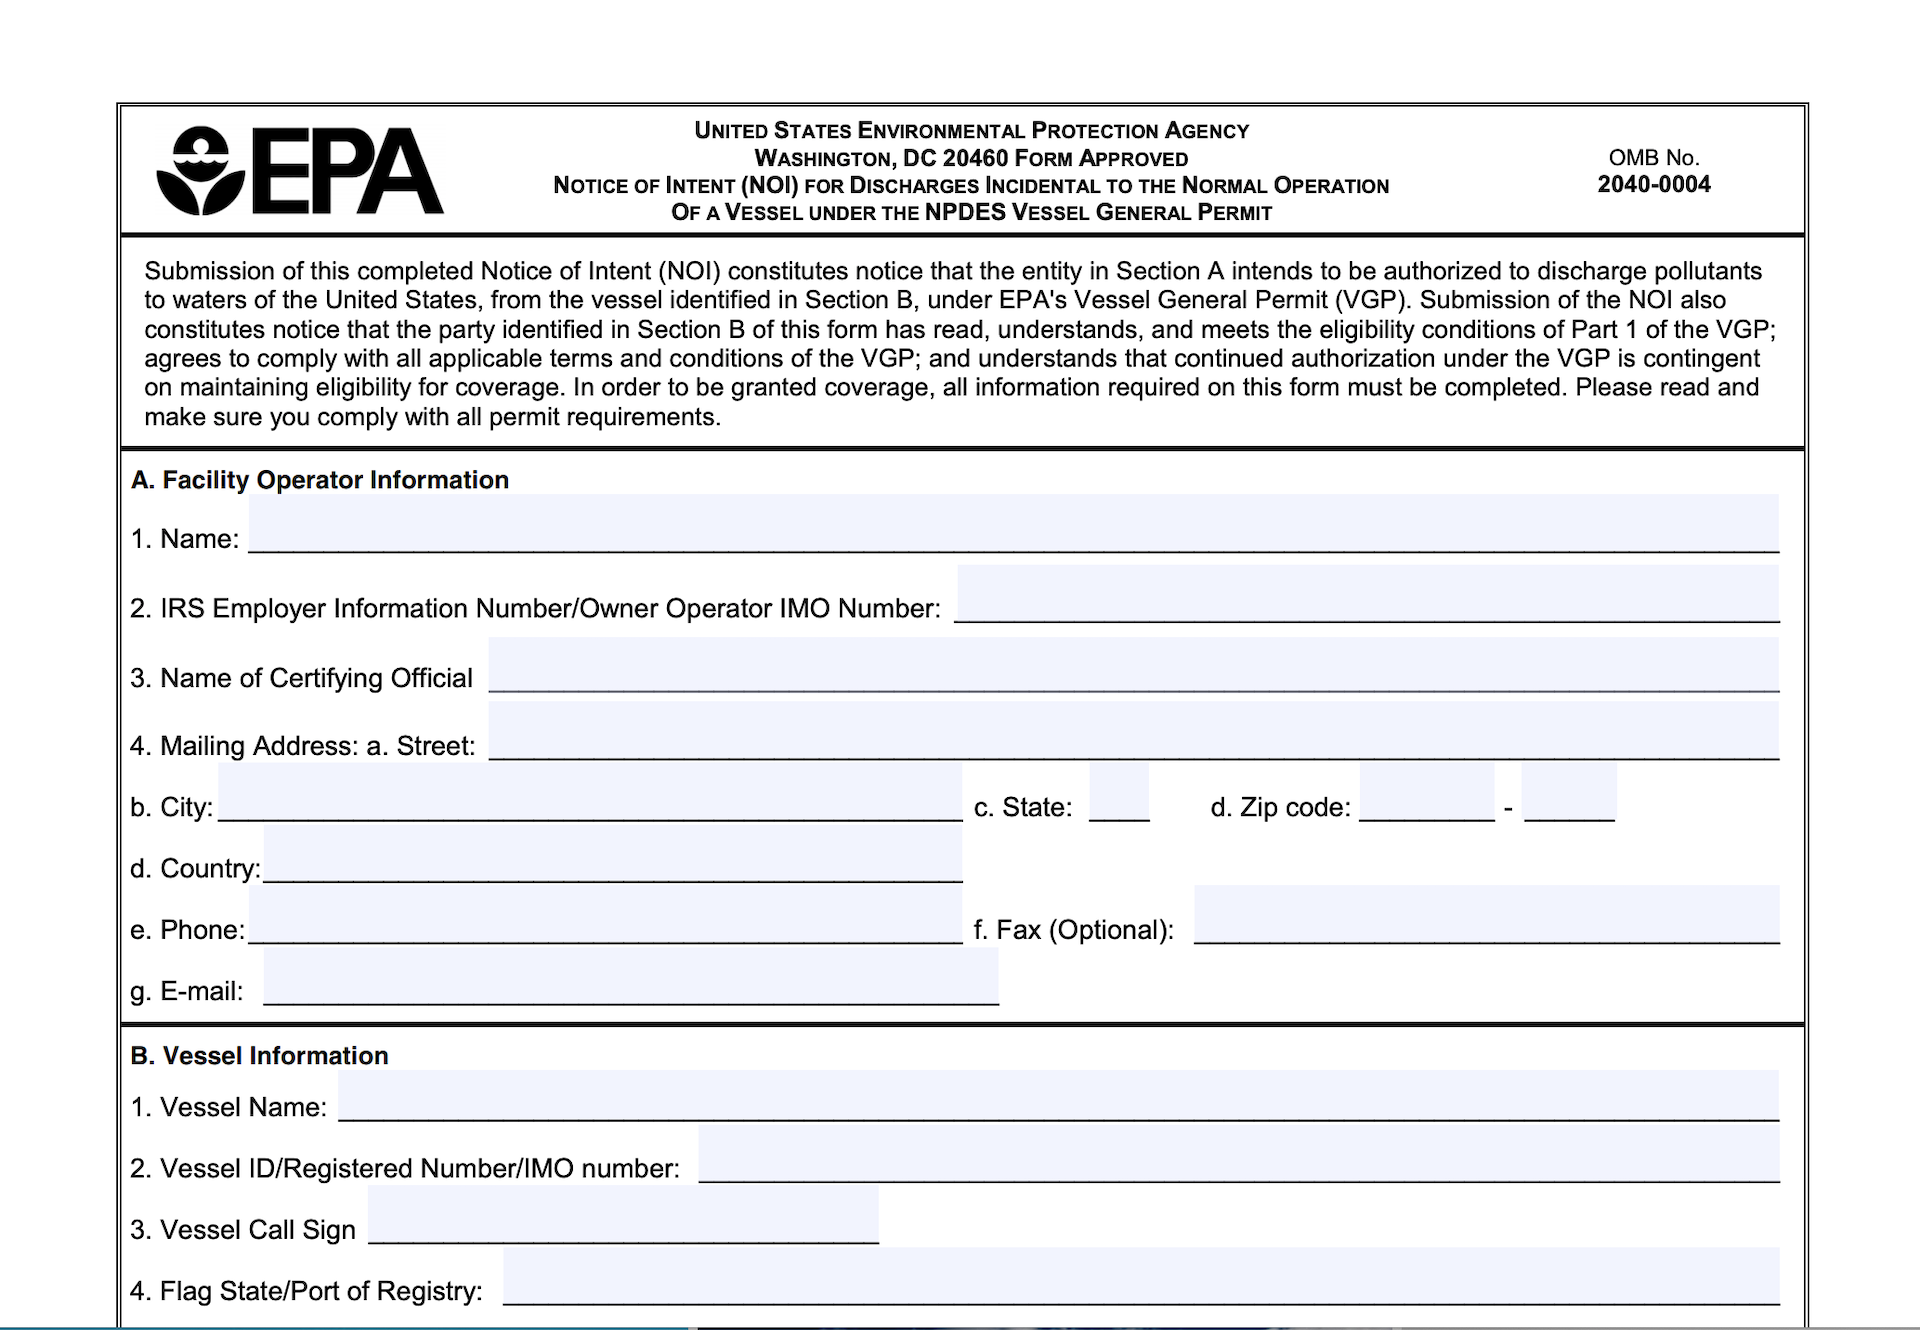 Submitting a Notice of Intent to the EPA: What Do Permits Cover?